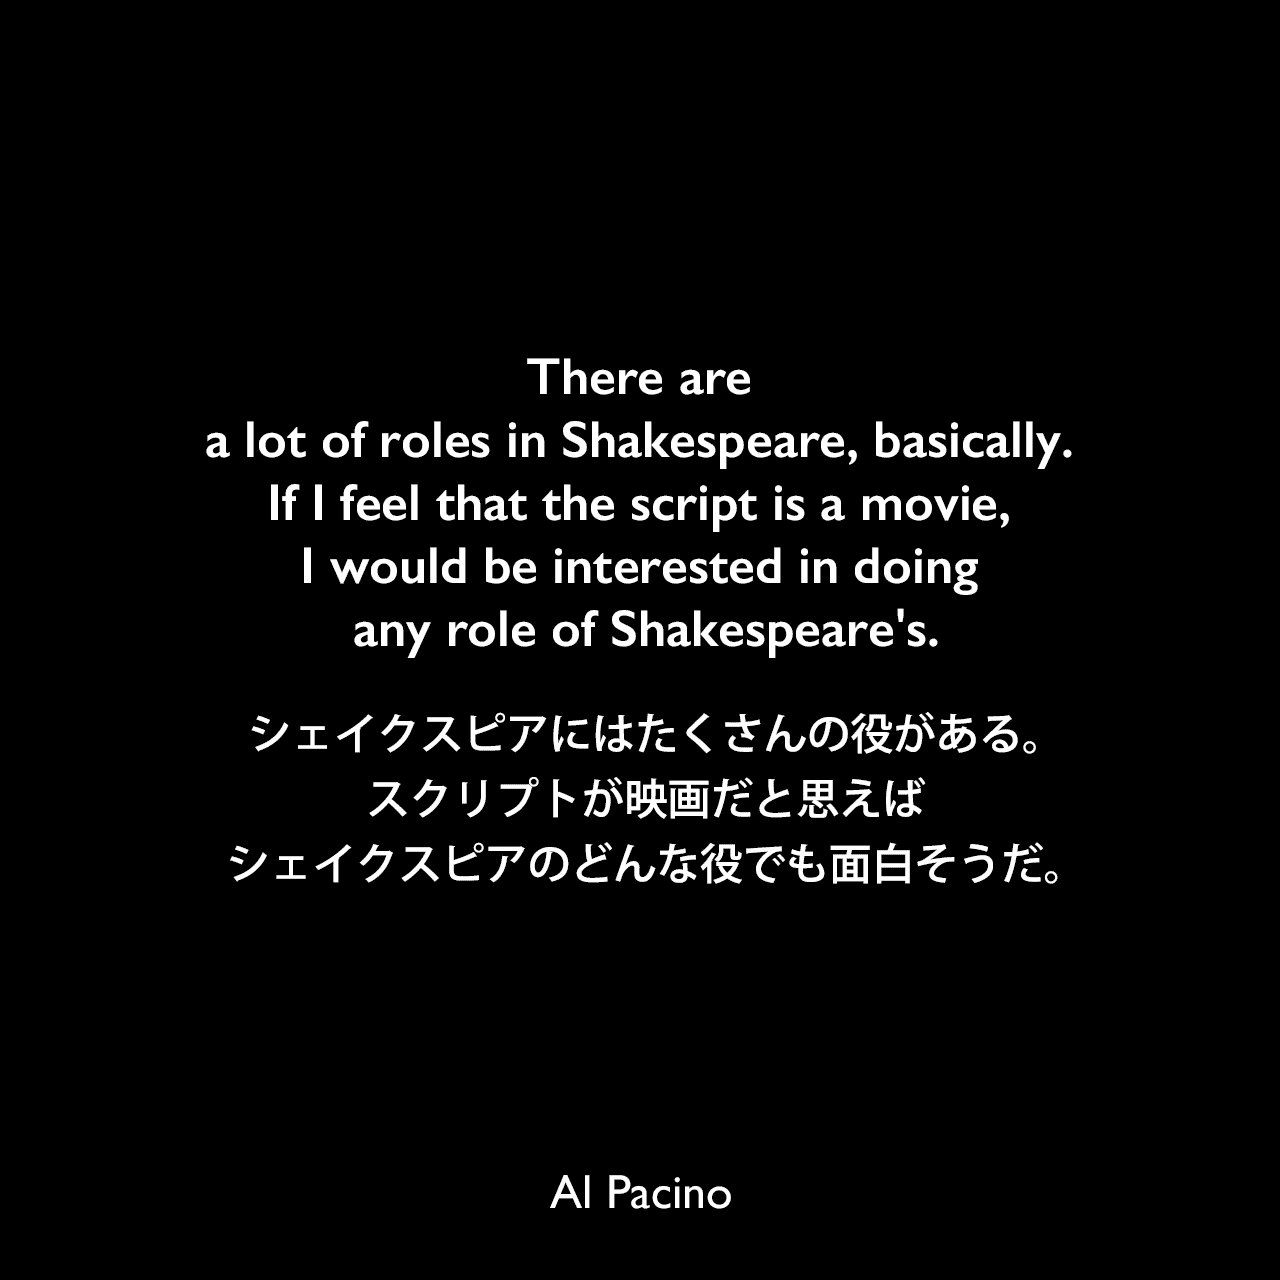 There are a lot of roles in Shakespeare, basically. If I feel that the script is a movie, I would be interested in doing any role of Shakespeare's.シェイクスピアにはたくさんの役がある。スクリプトが映画だと思えばシェイクスピアのどんな役でも面白そうだ。Al Pacino